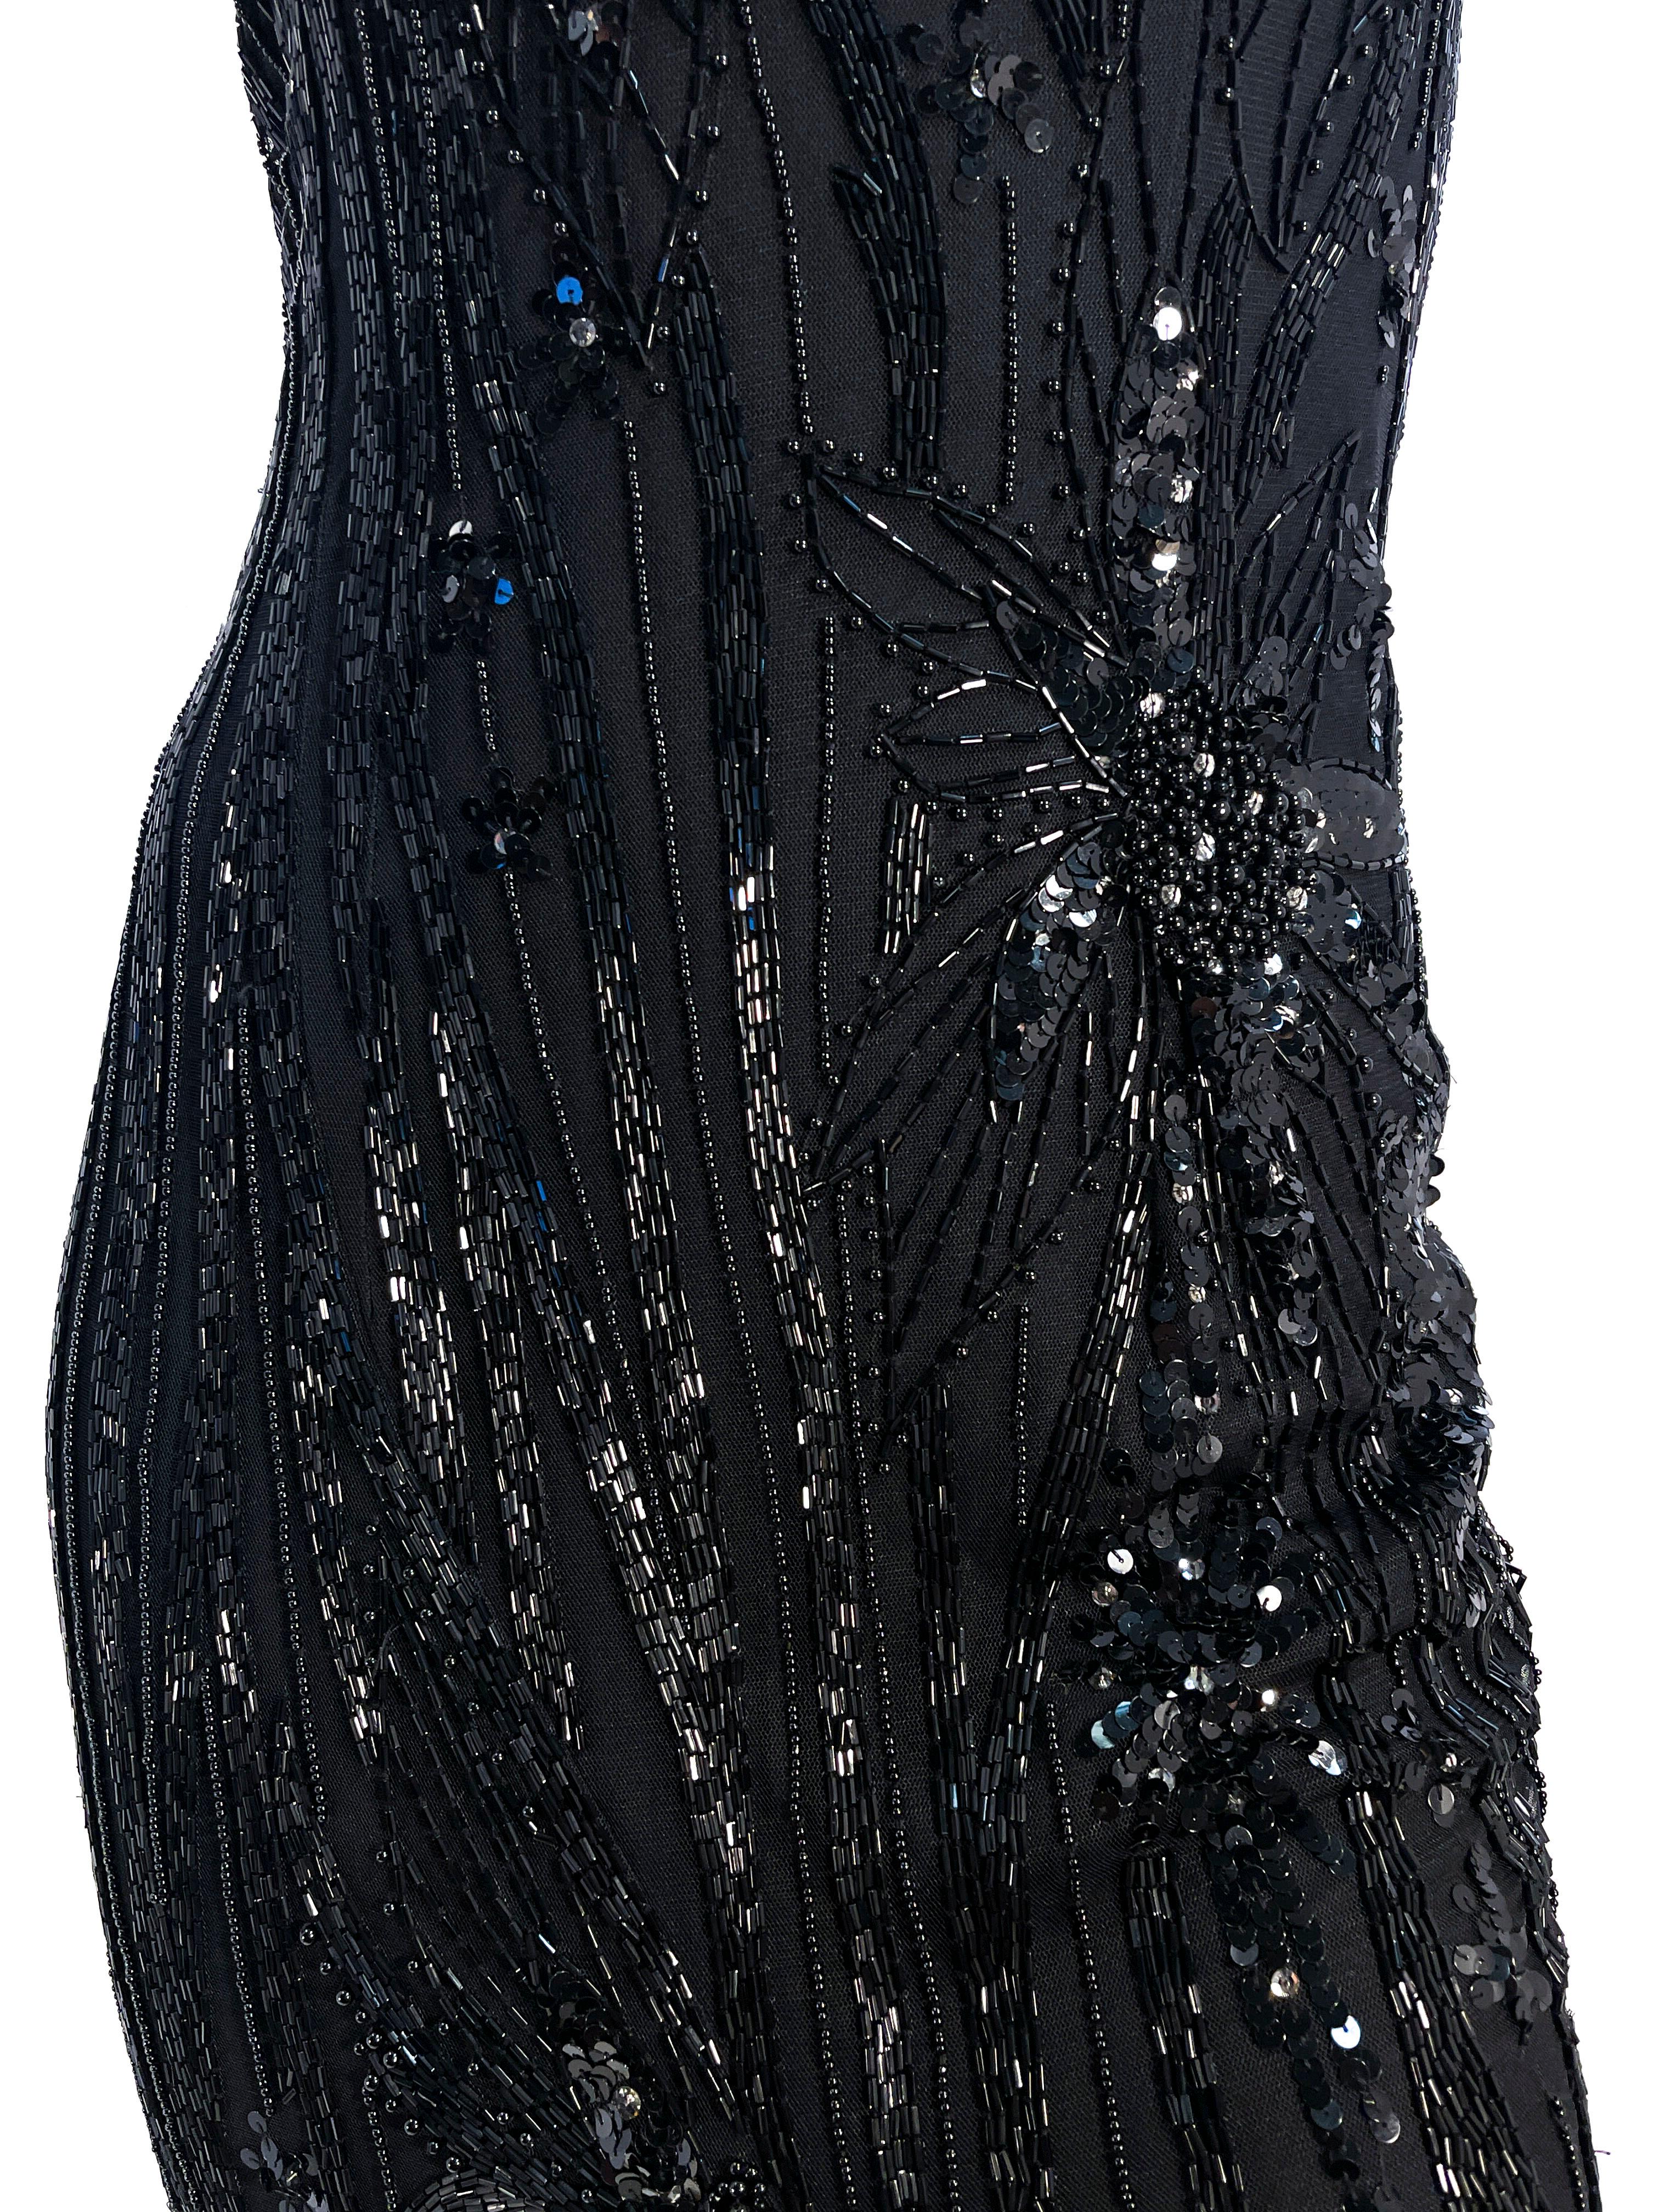 1980s Bob Mackie Black Evening Gown For Sale 2